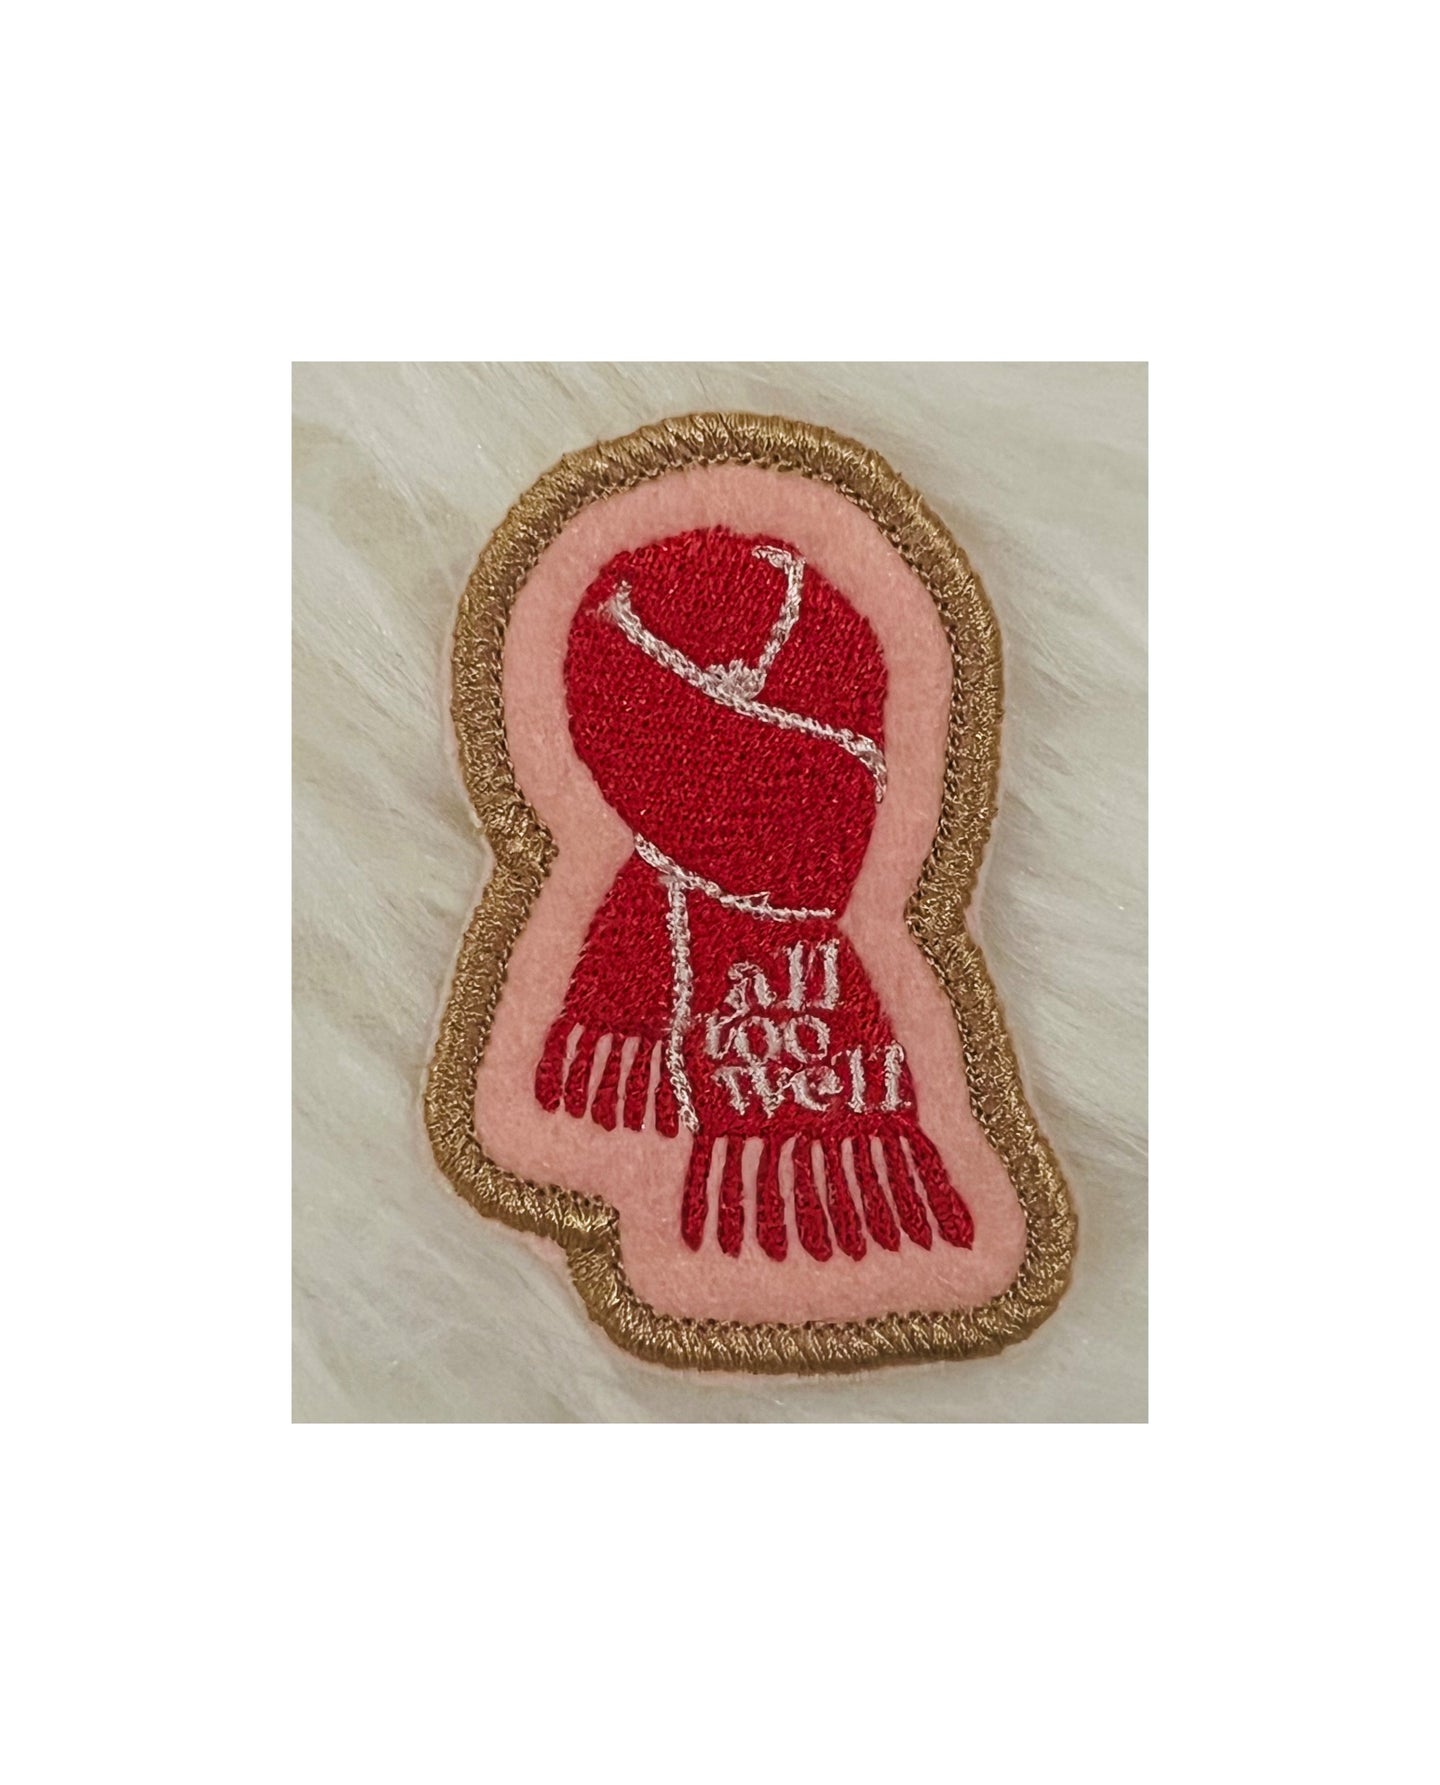 Taylor Swift All Too Well Iron On Patch